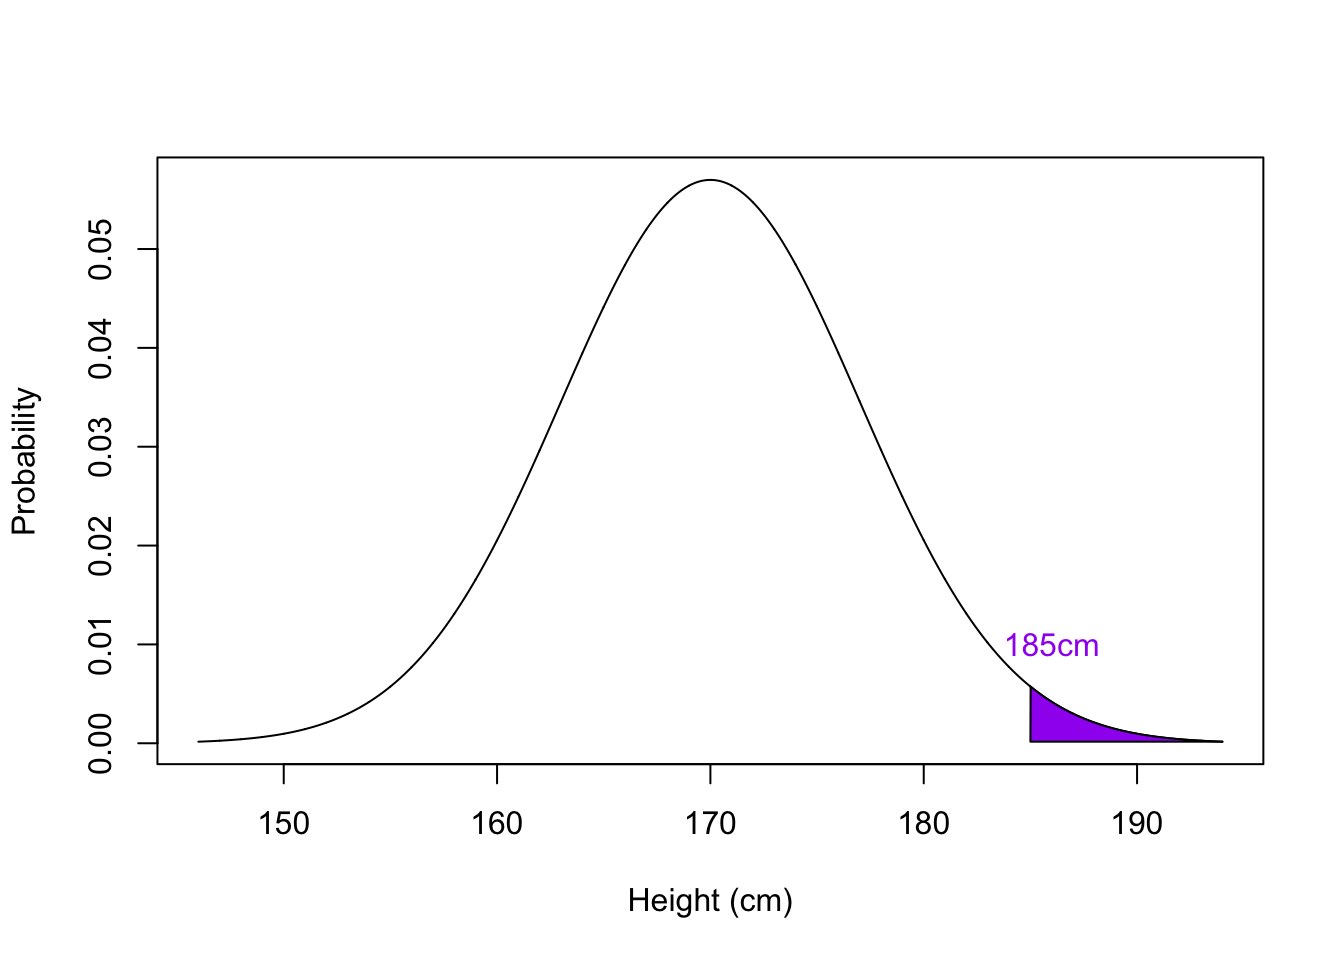 The Normal Distribution of Height with the probability of people of 185cm highlighted in purple, with a mean = 170cm and SD = 7